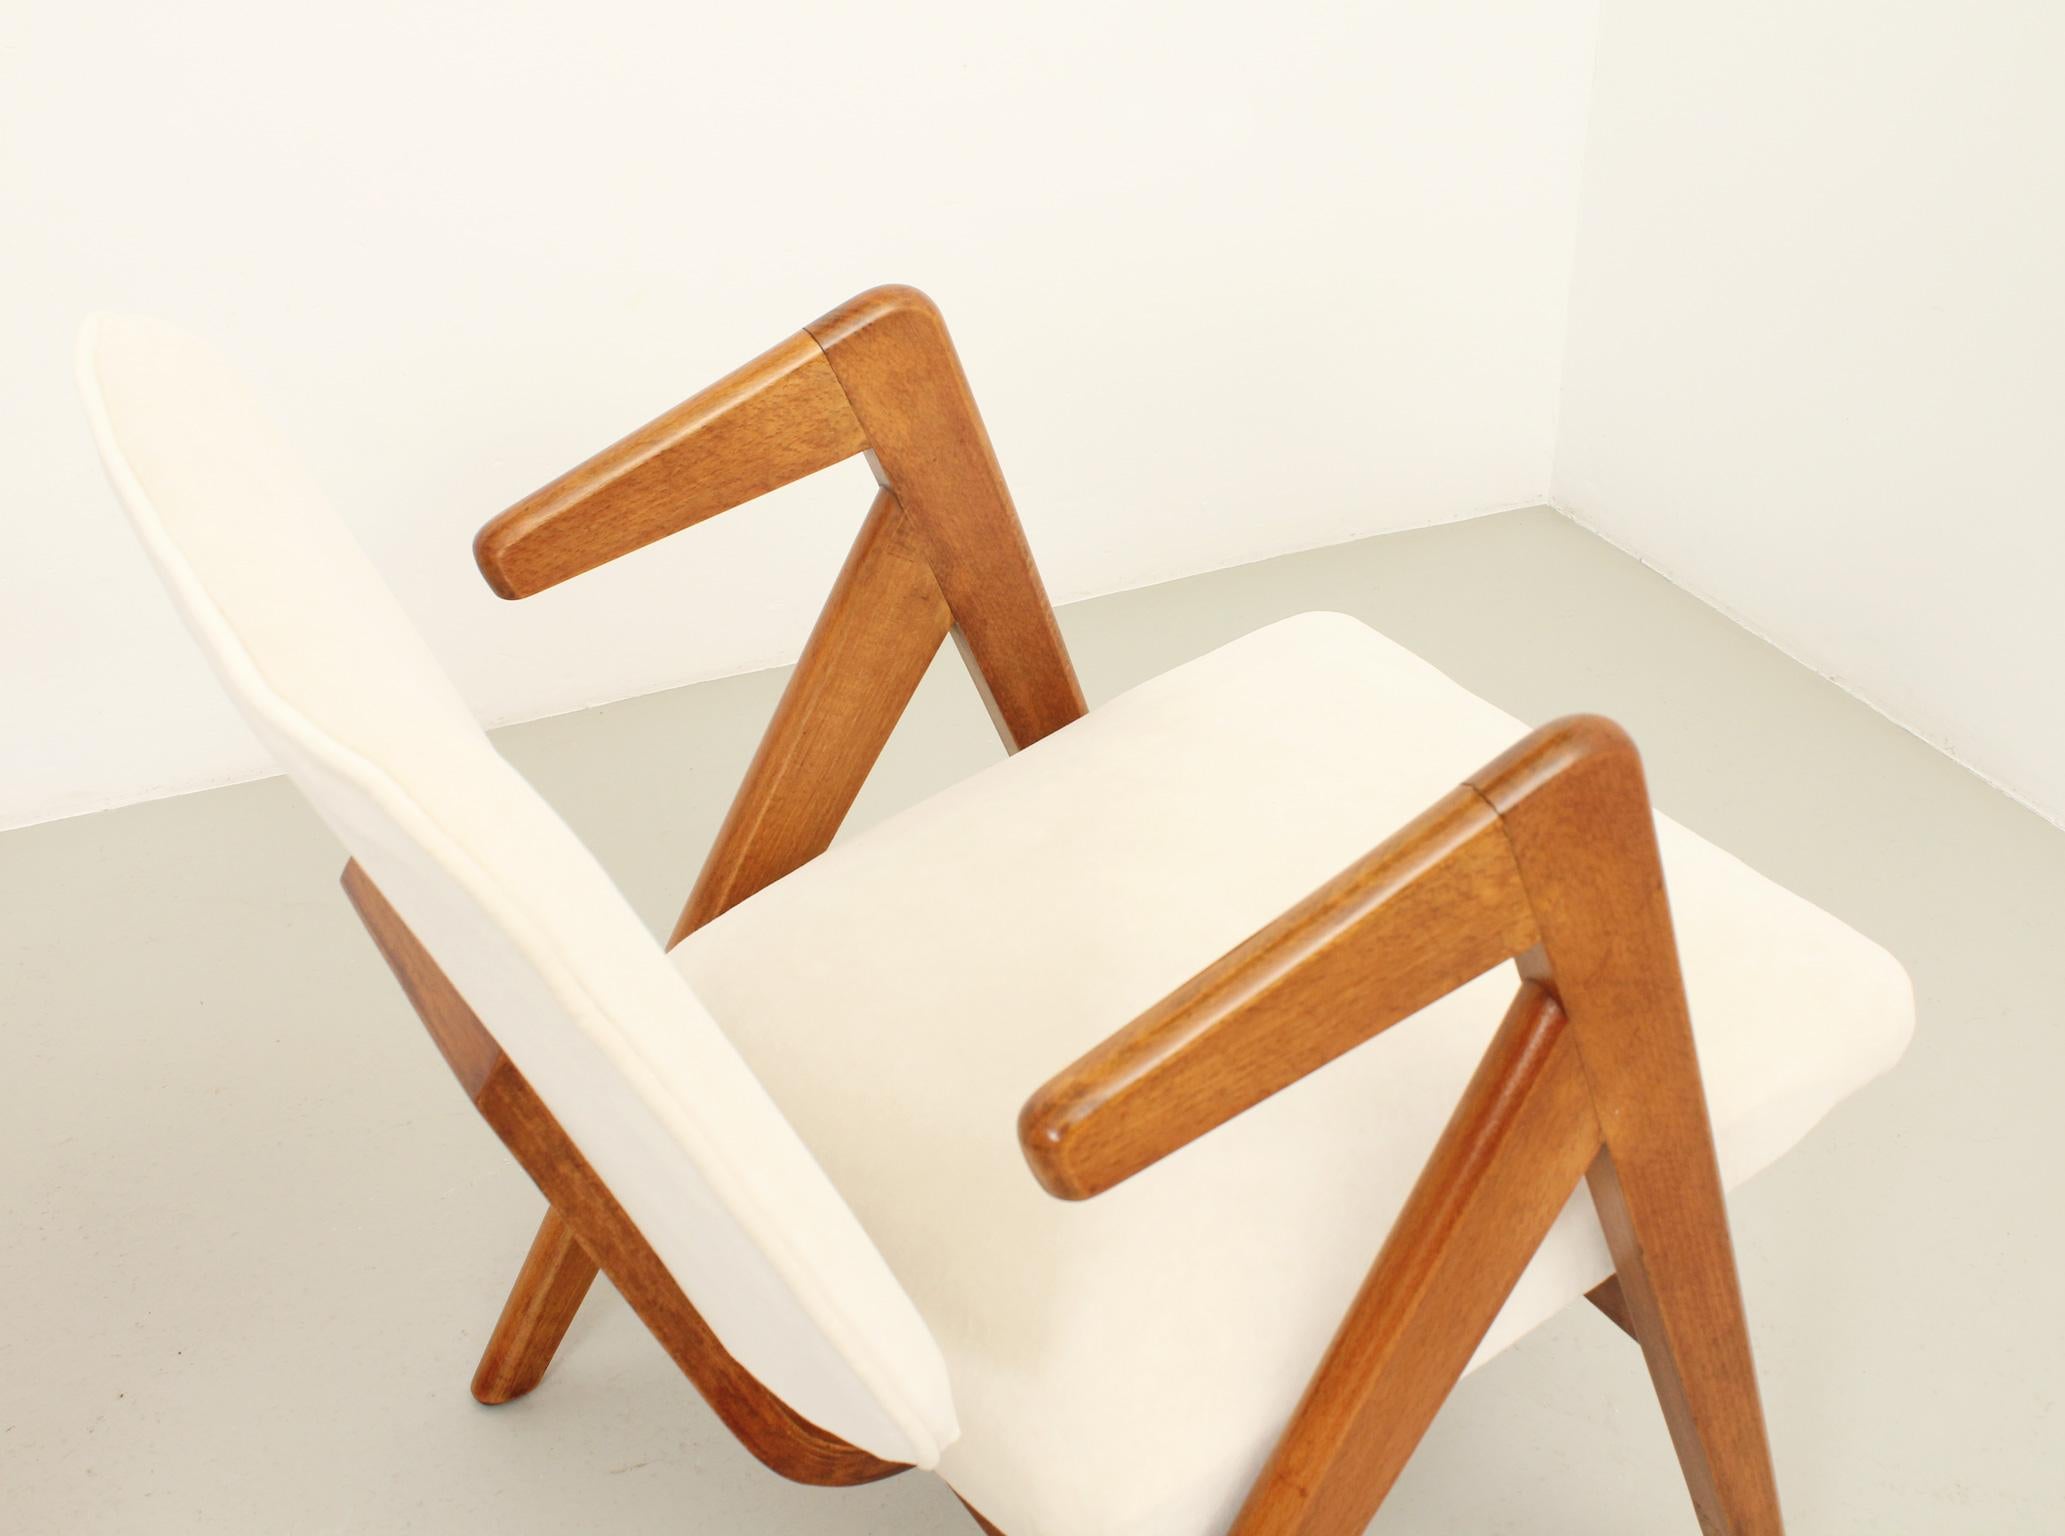 Pair of Hillestak Armchairs by Robin Day, UK, 1950s For Sale 3